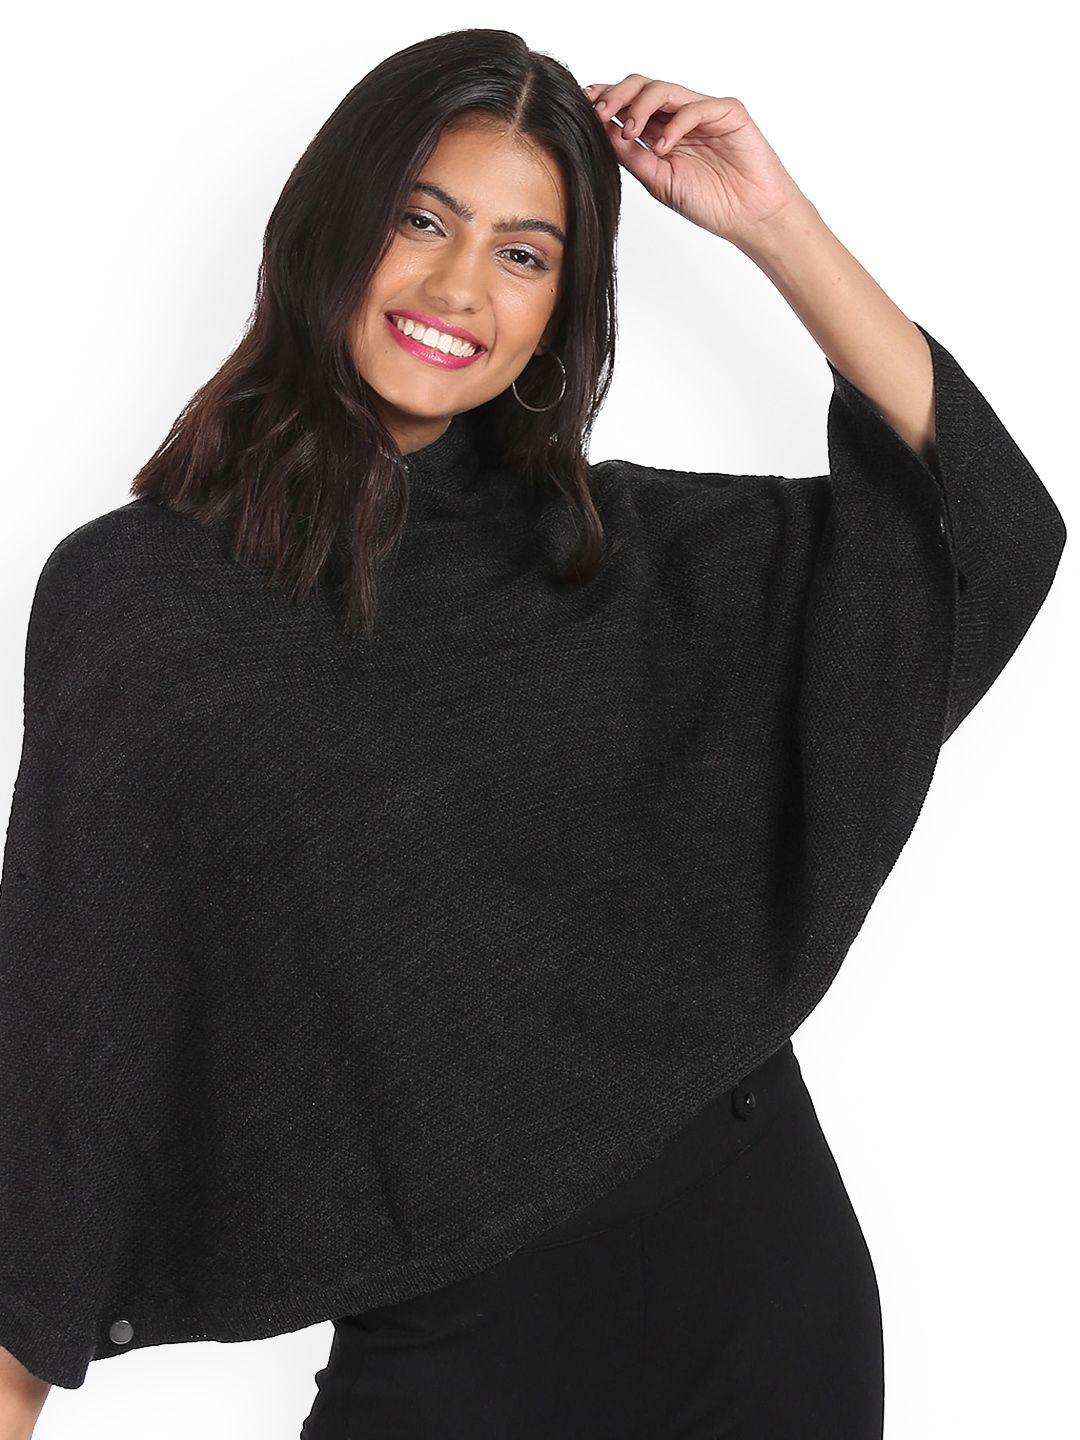 sugr-women-charcoal-hooded-patterned-weave-sweater